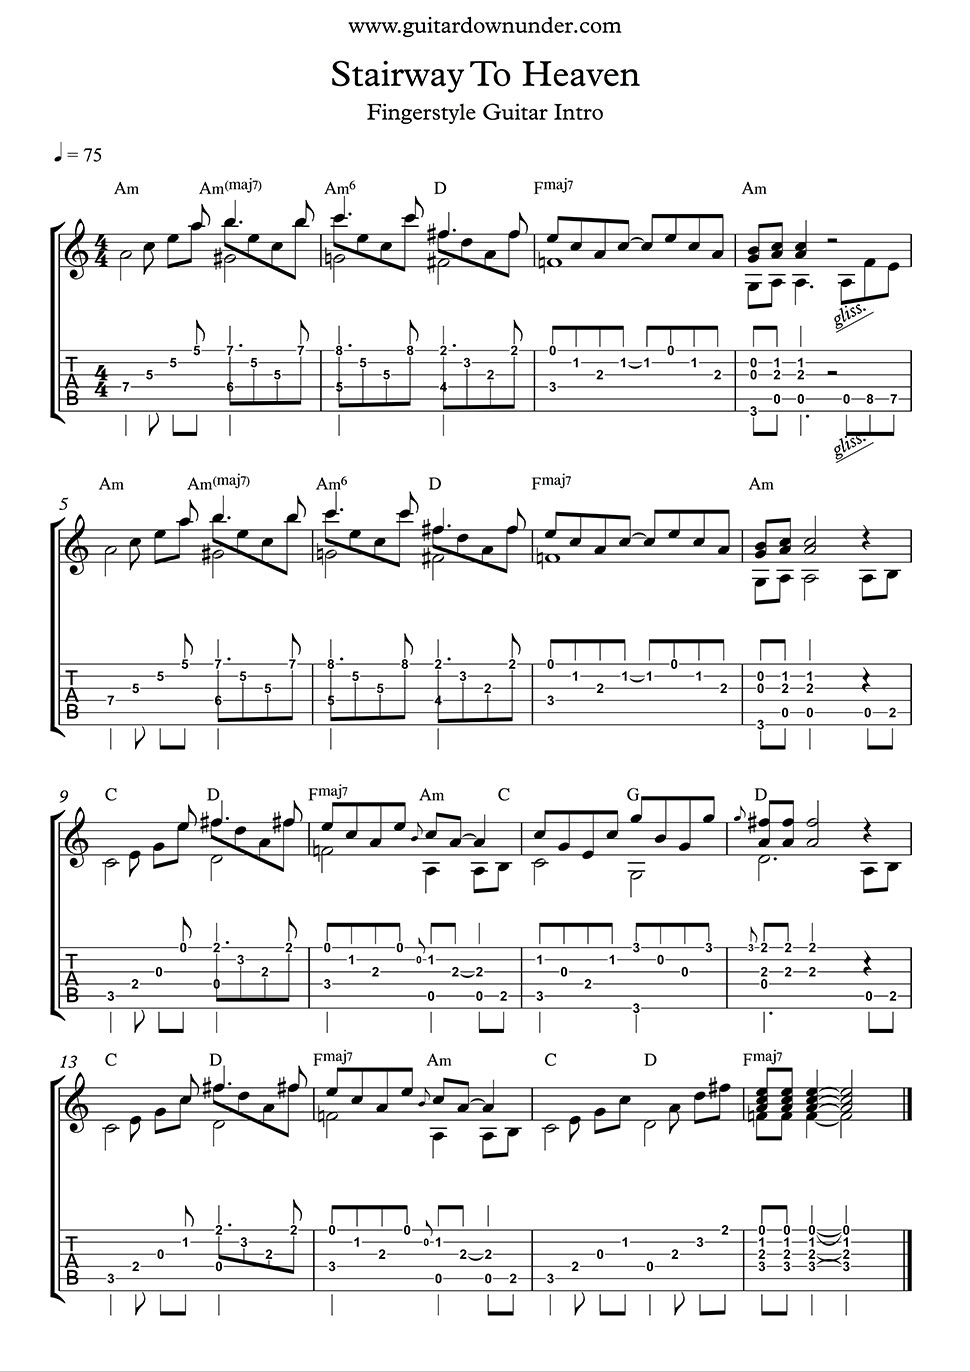 Stairway To Heaven Chords Stairway To Heaven Led Zeppelin Includes Words And Guitar Tabs